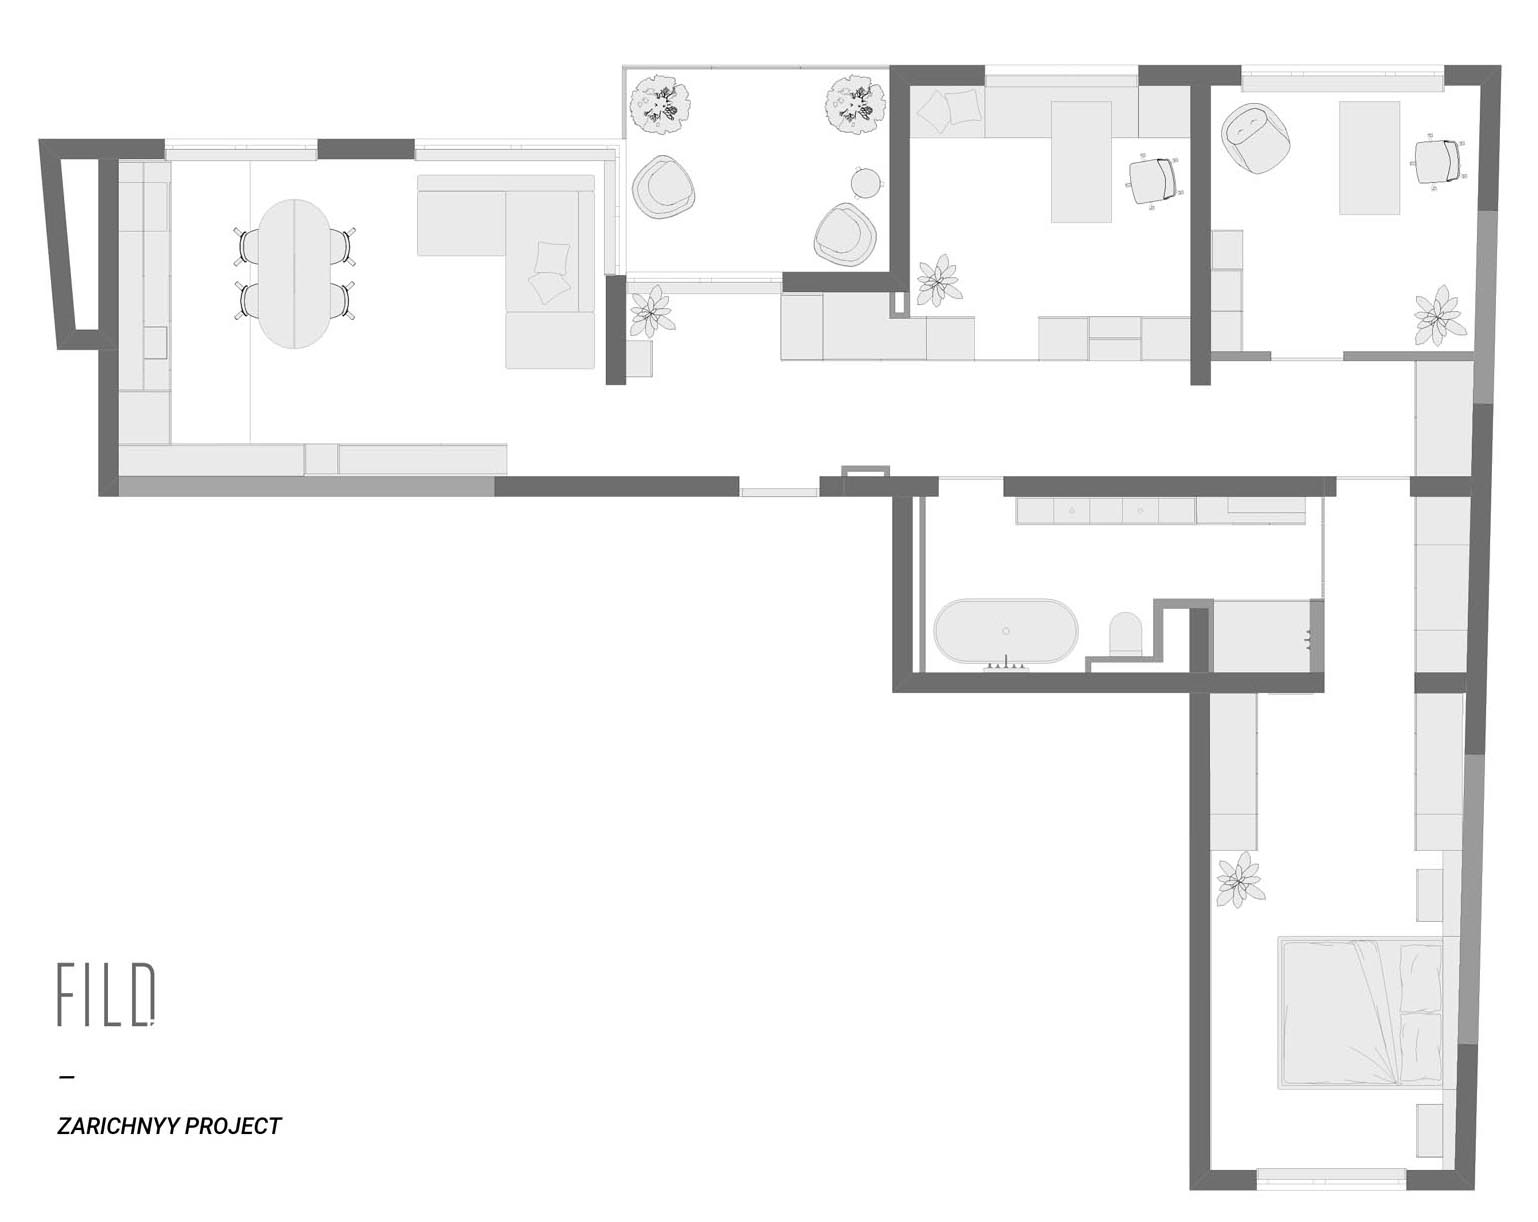 The floor plan of a modern one bedroom / two home office apartment.